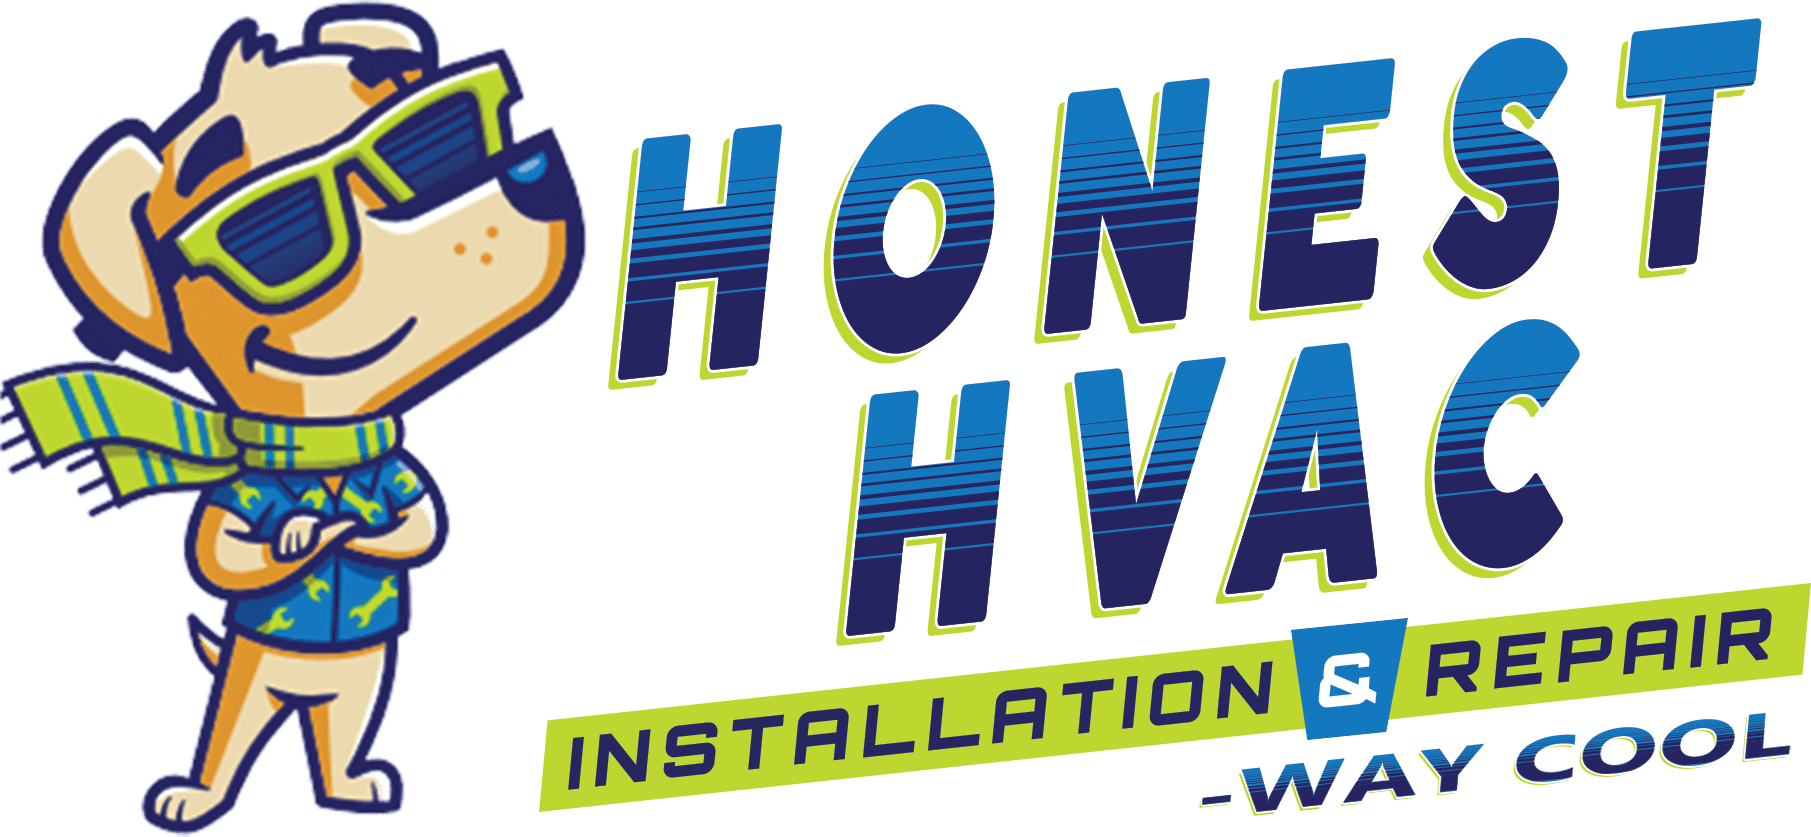 Honest HVAC Installation & Repair Expands to Northwestern Phoenix with New Office Location